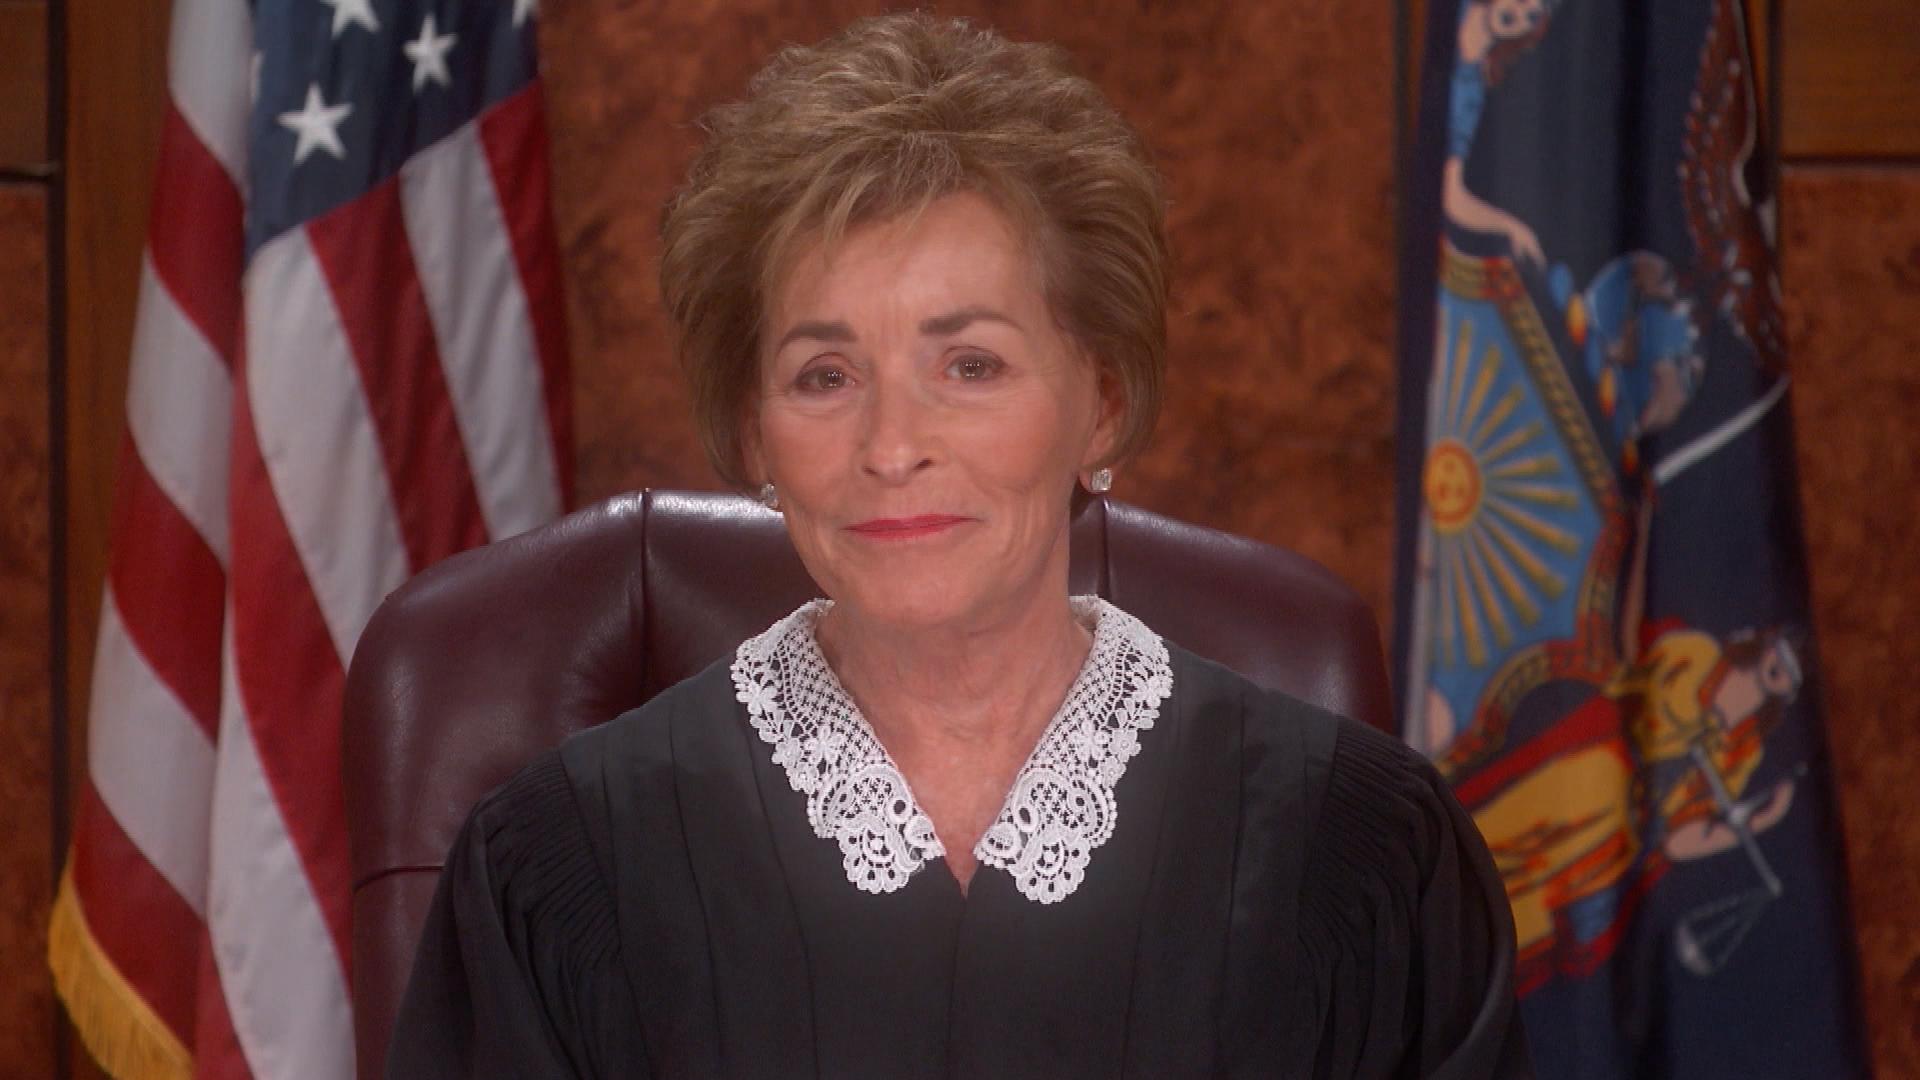 Judge Judy Death Did Judge Judy Pass Away Or Is She Alive